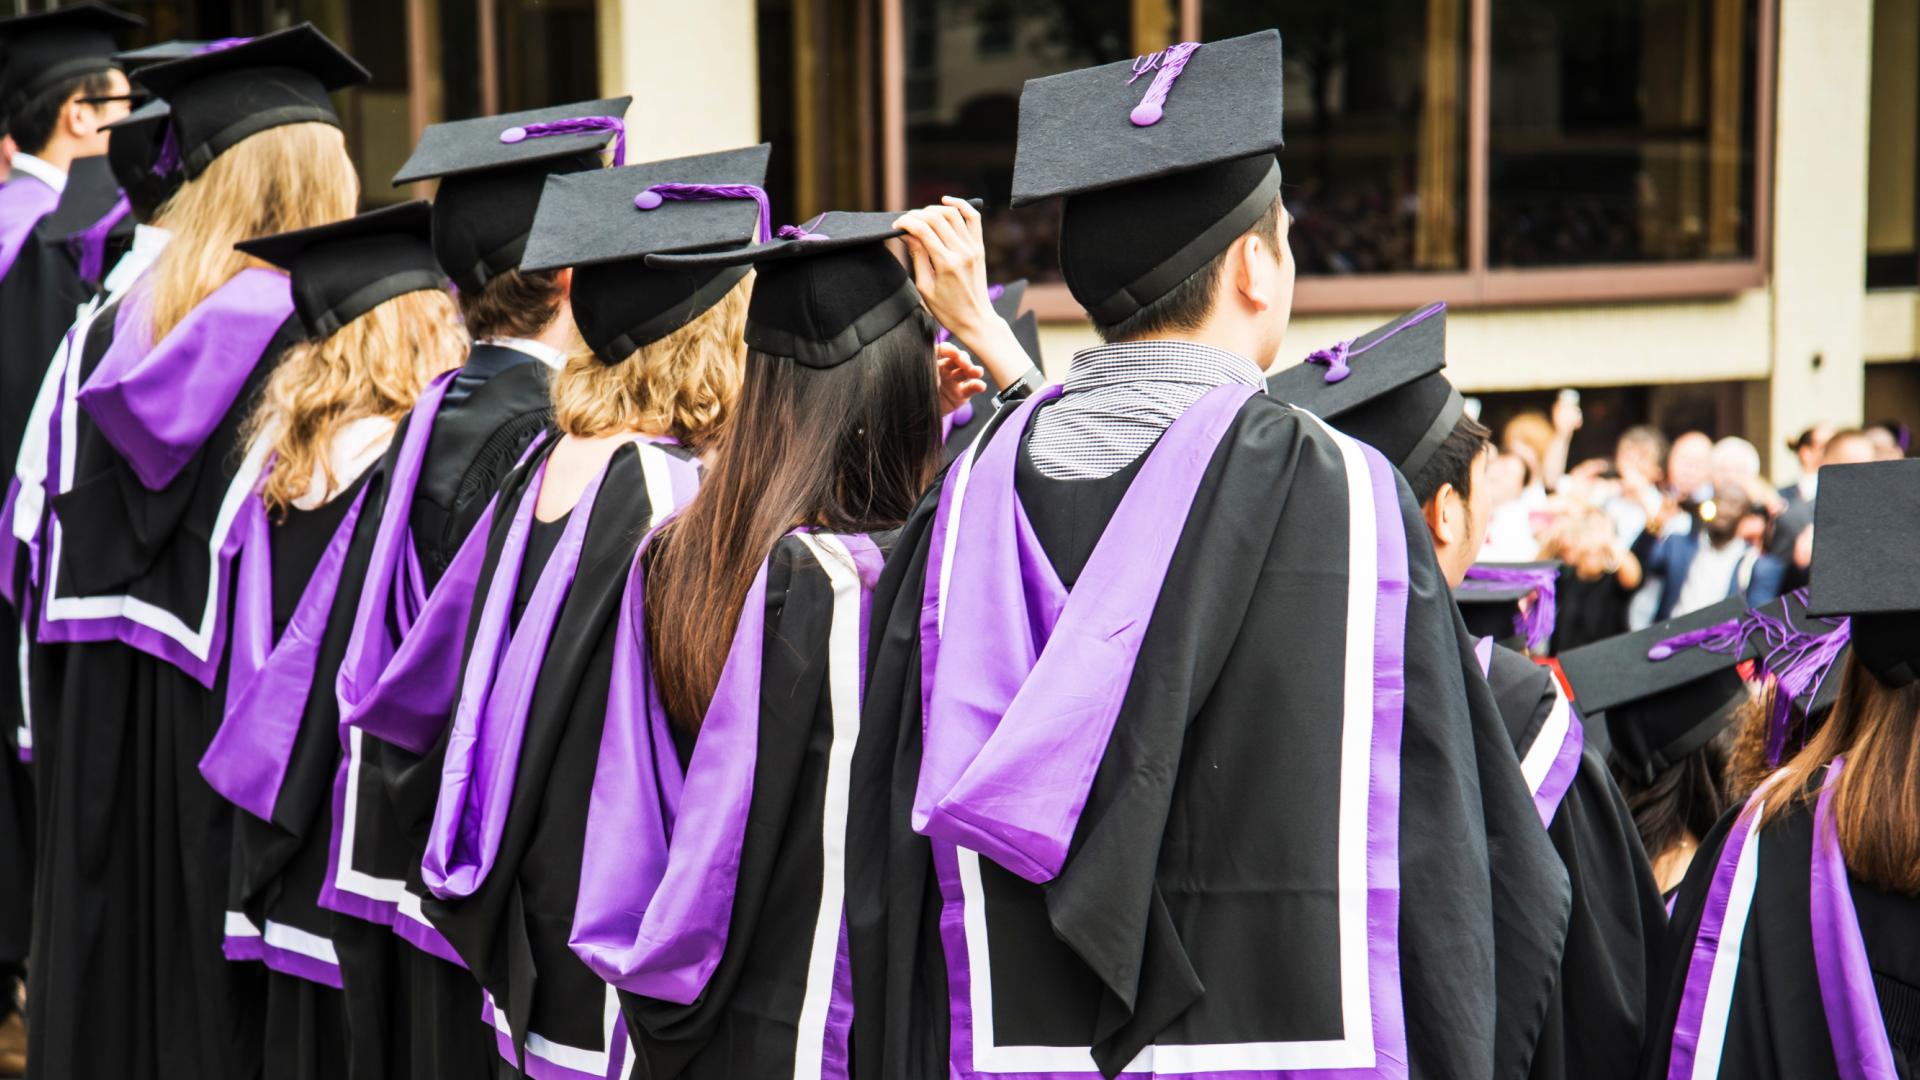 Image of students in graduation gowns